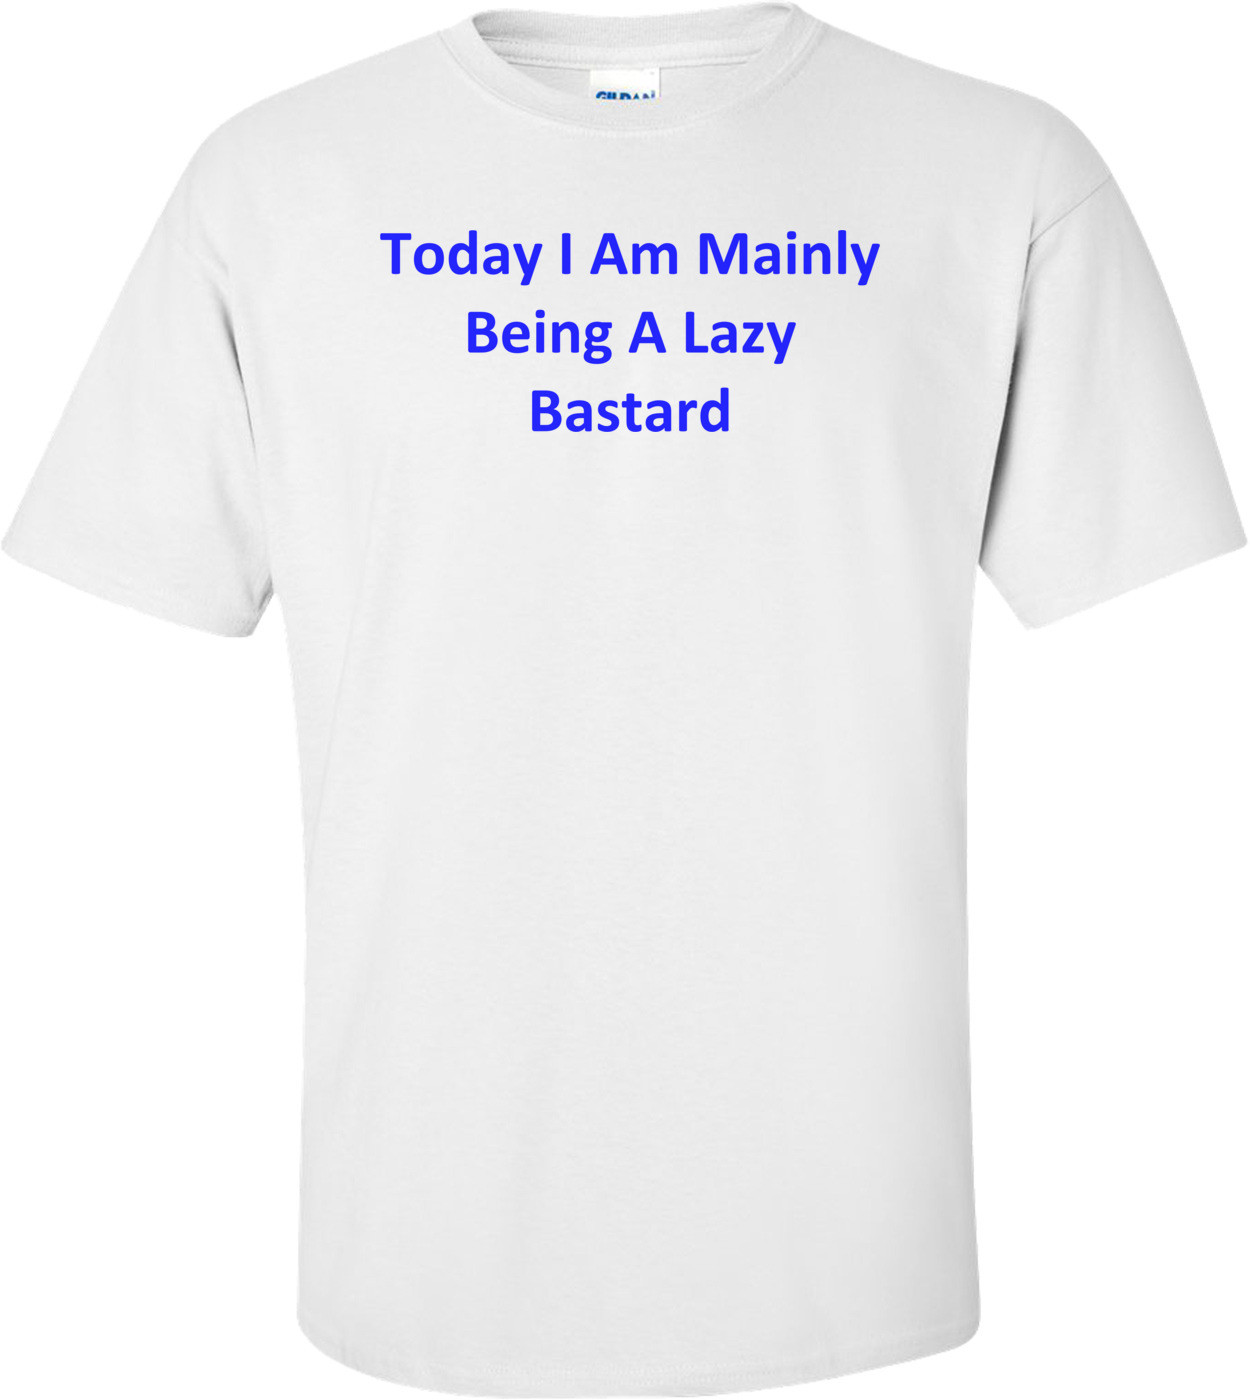 Today I Am Mainly Being A Lazy Bastard Shirt